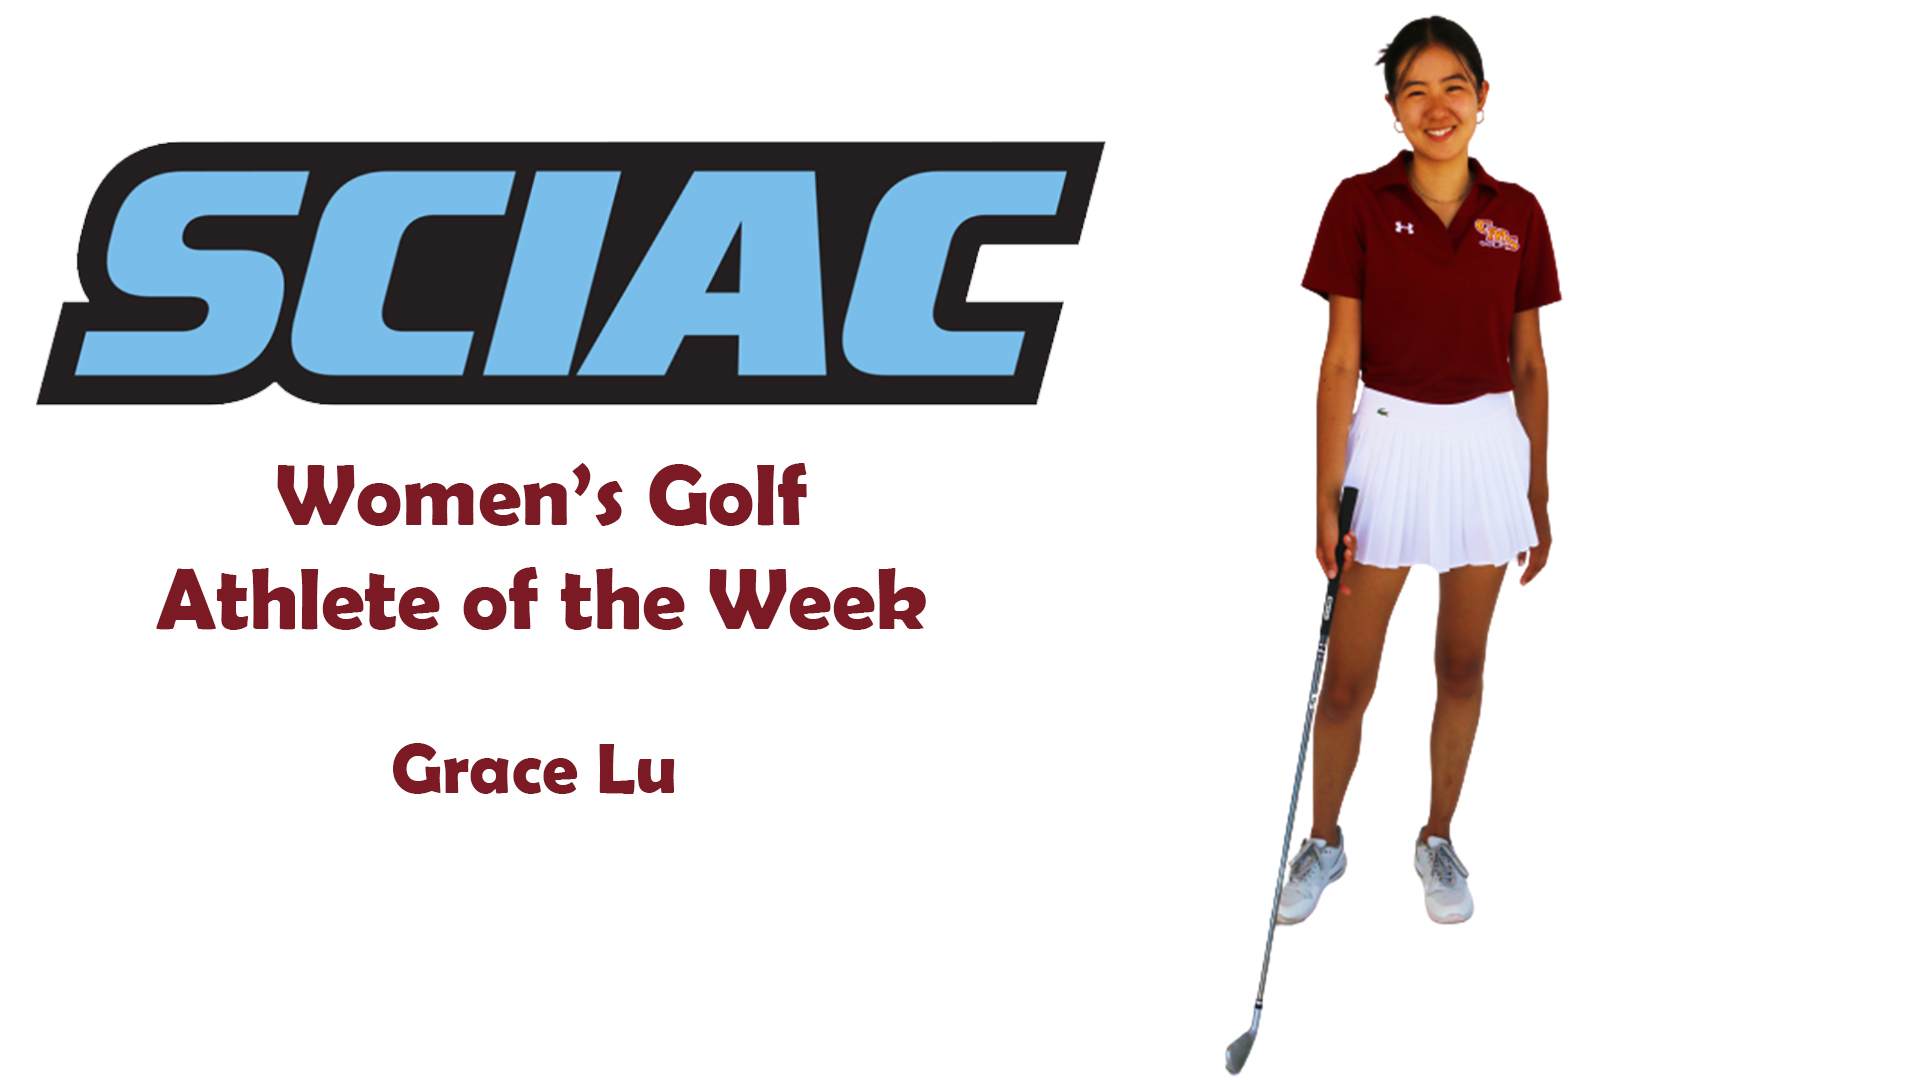 Posed Shot of Grace Lu with the SCIAC logo